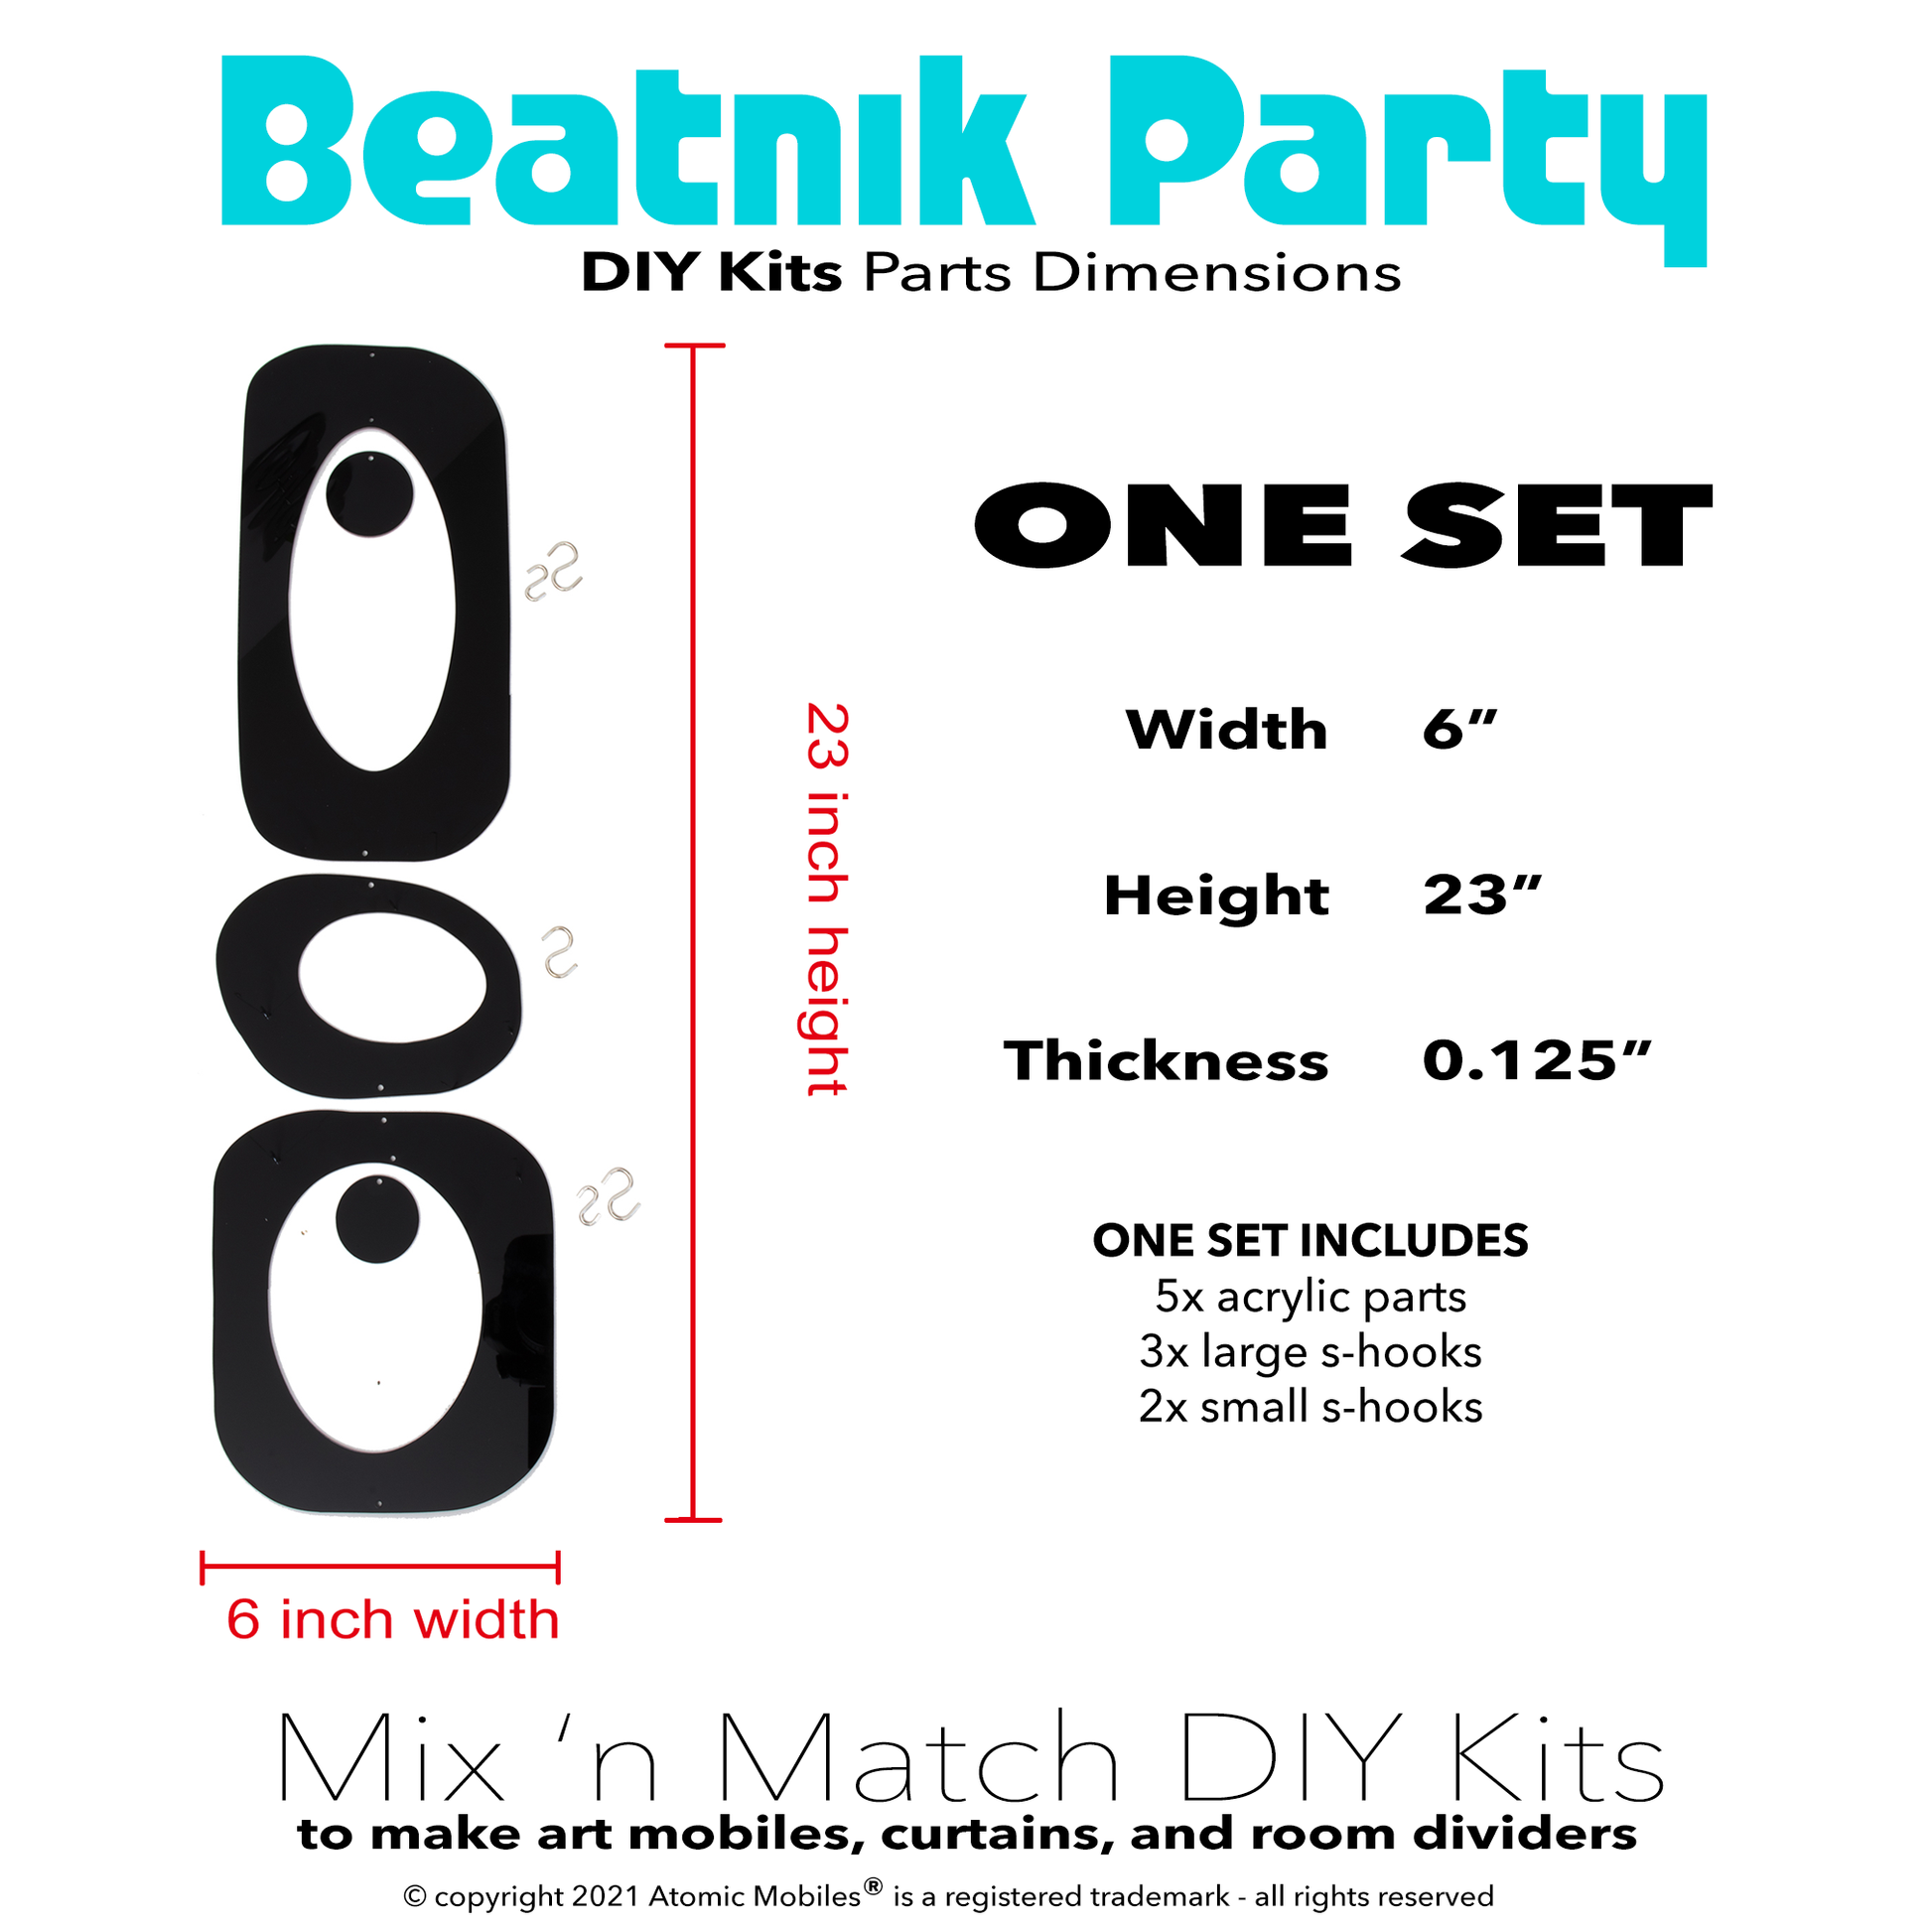 Example of One Set of Beatnik Party DIY Kits to make room dividers, curtains, and hanging art mobiles by AtomicMobiles.com